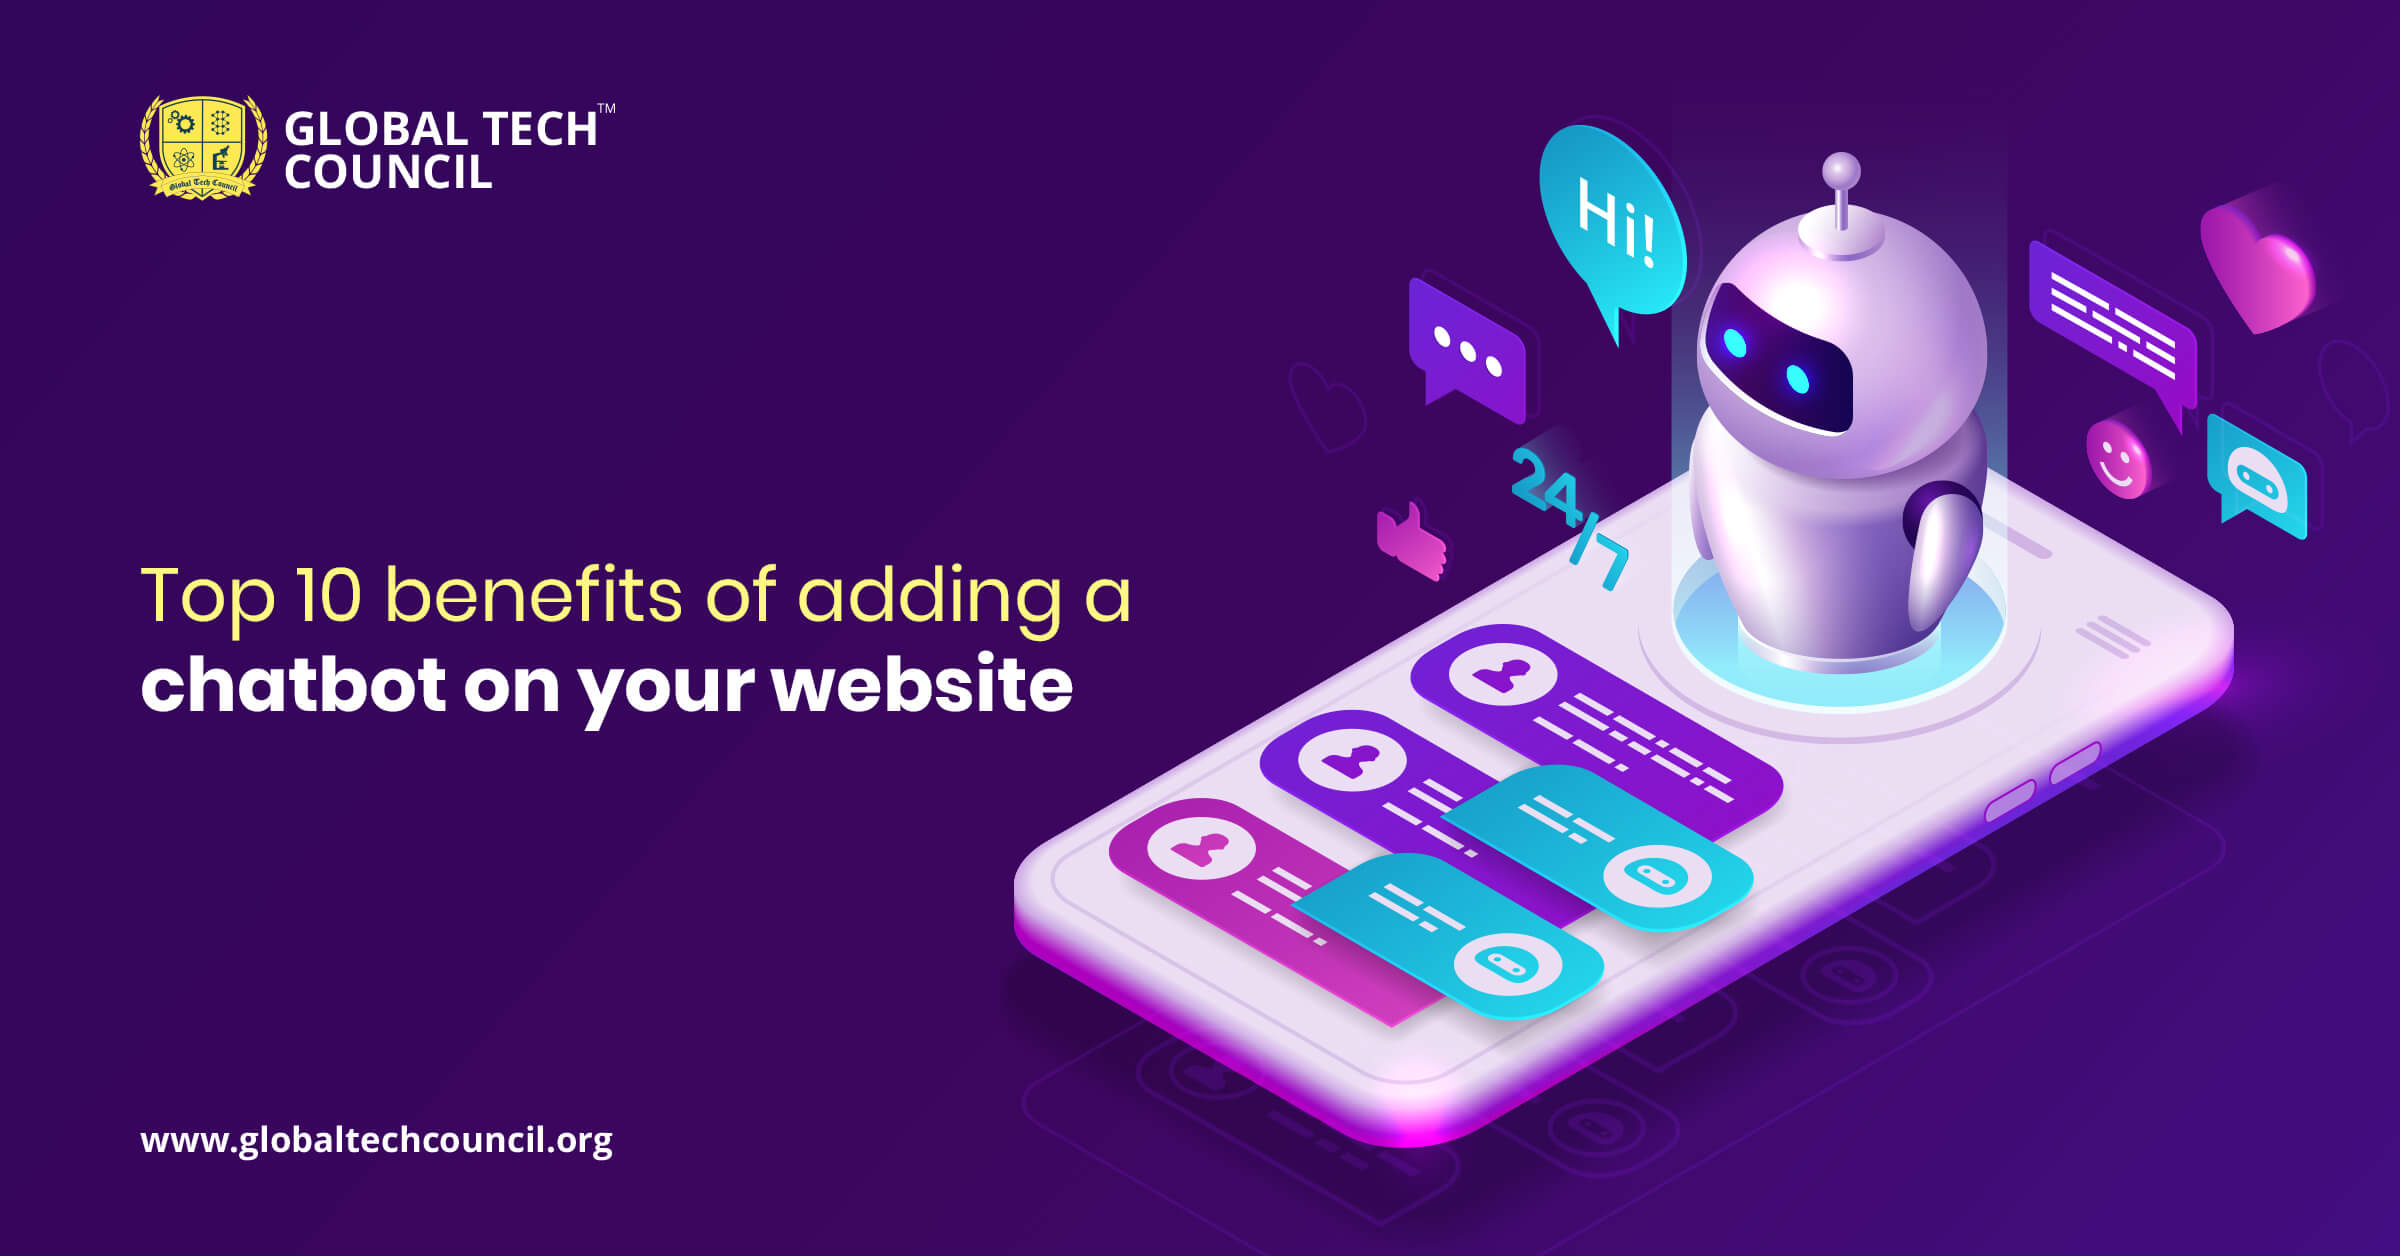 Top 10 benefits of adding a chatbot on your website